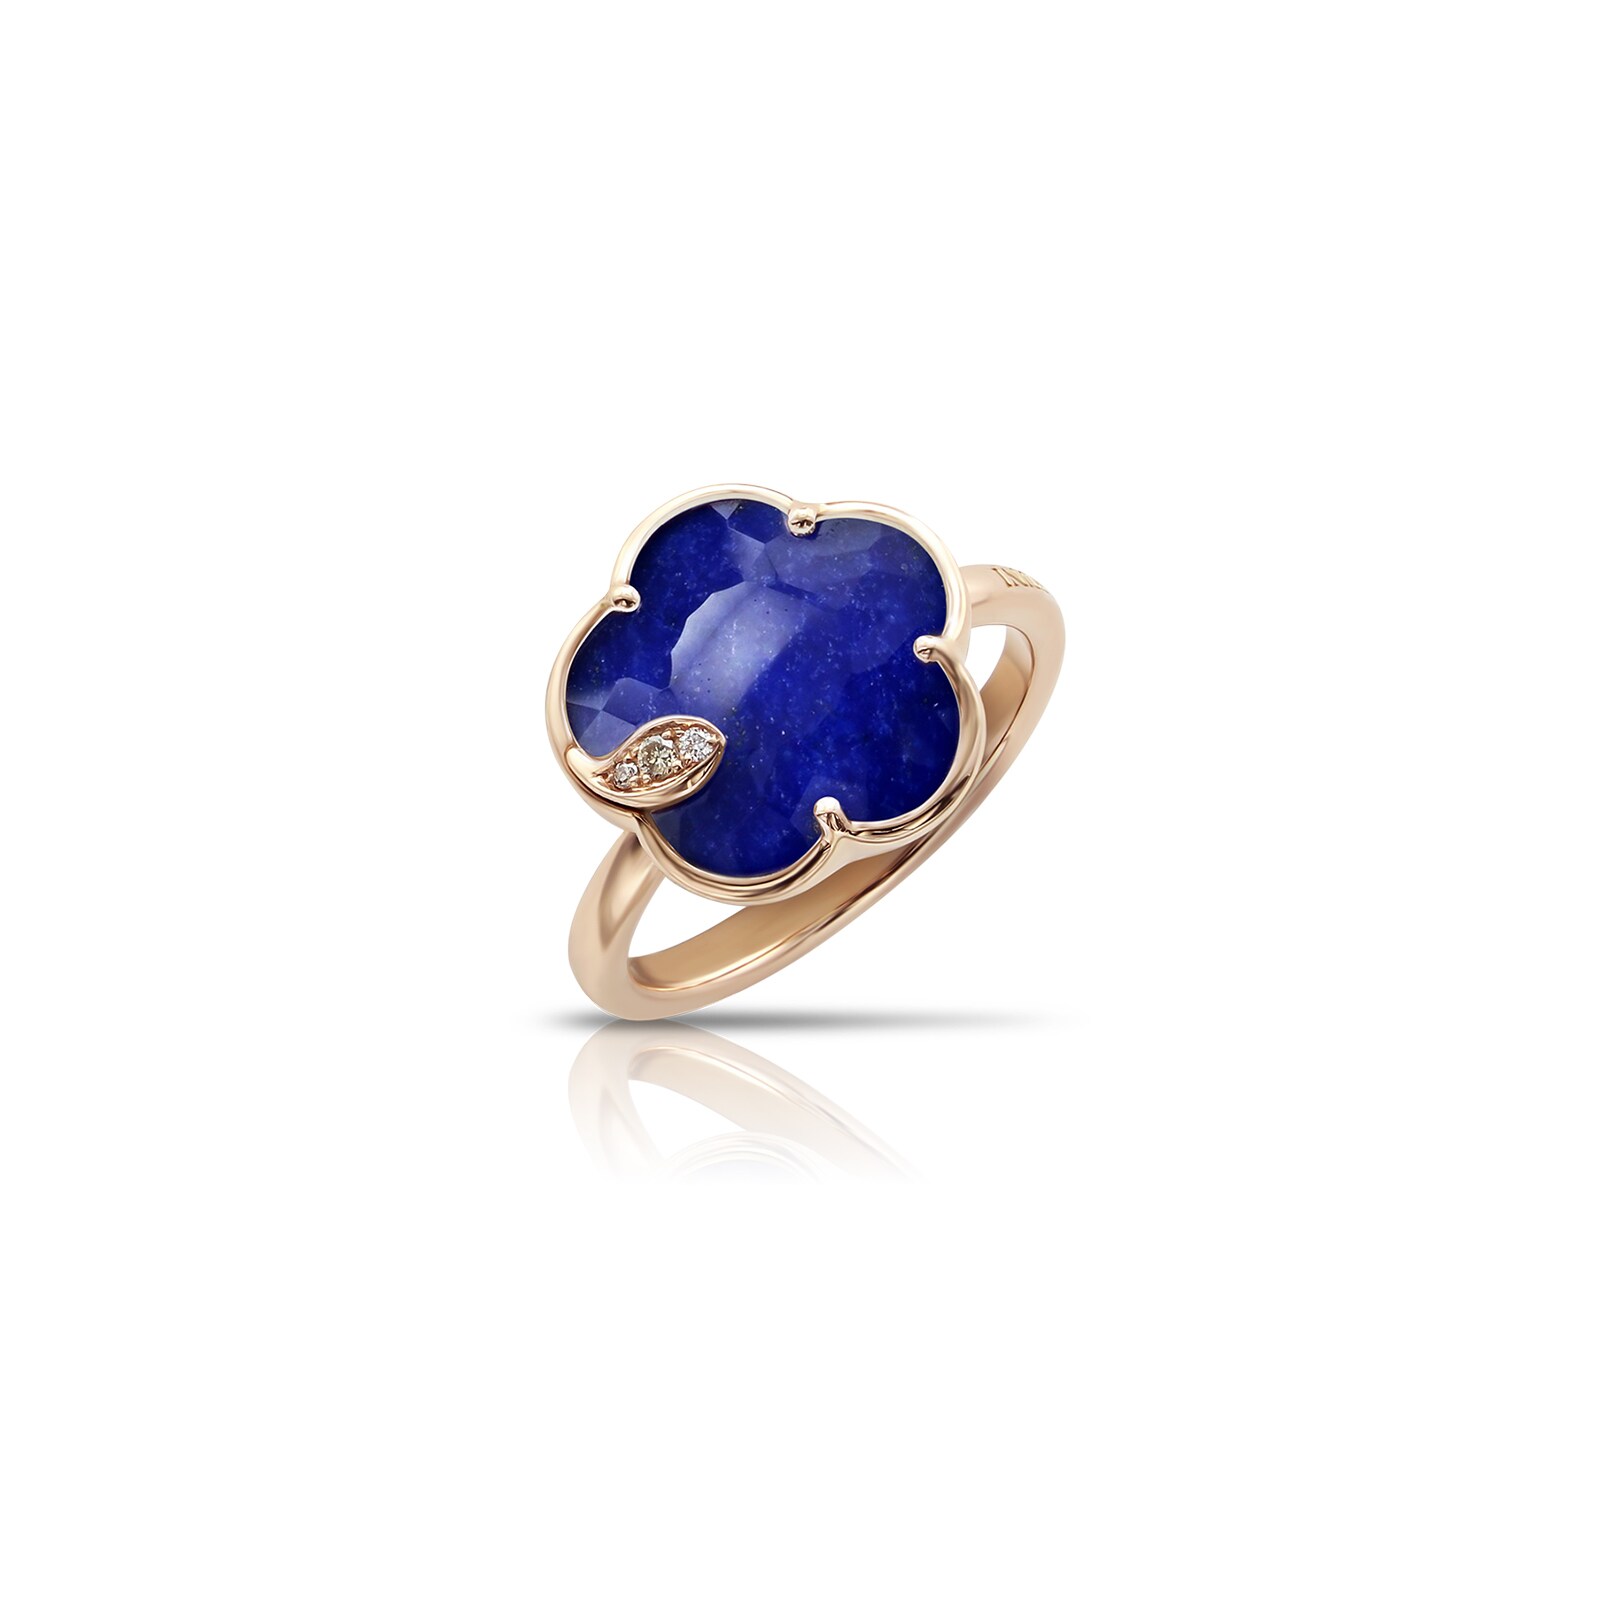 Petit Joli Ring in 18ct Rose Gold with Rock Crystal and Lapis Lazuli doublet and Diamonds - Ring Size M